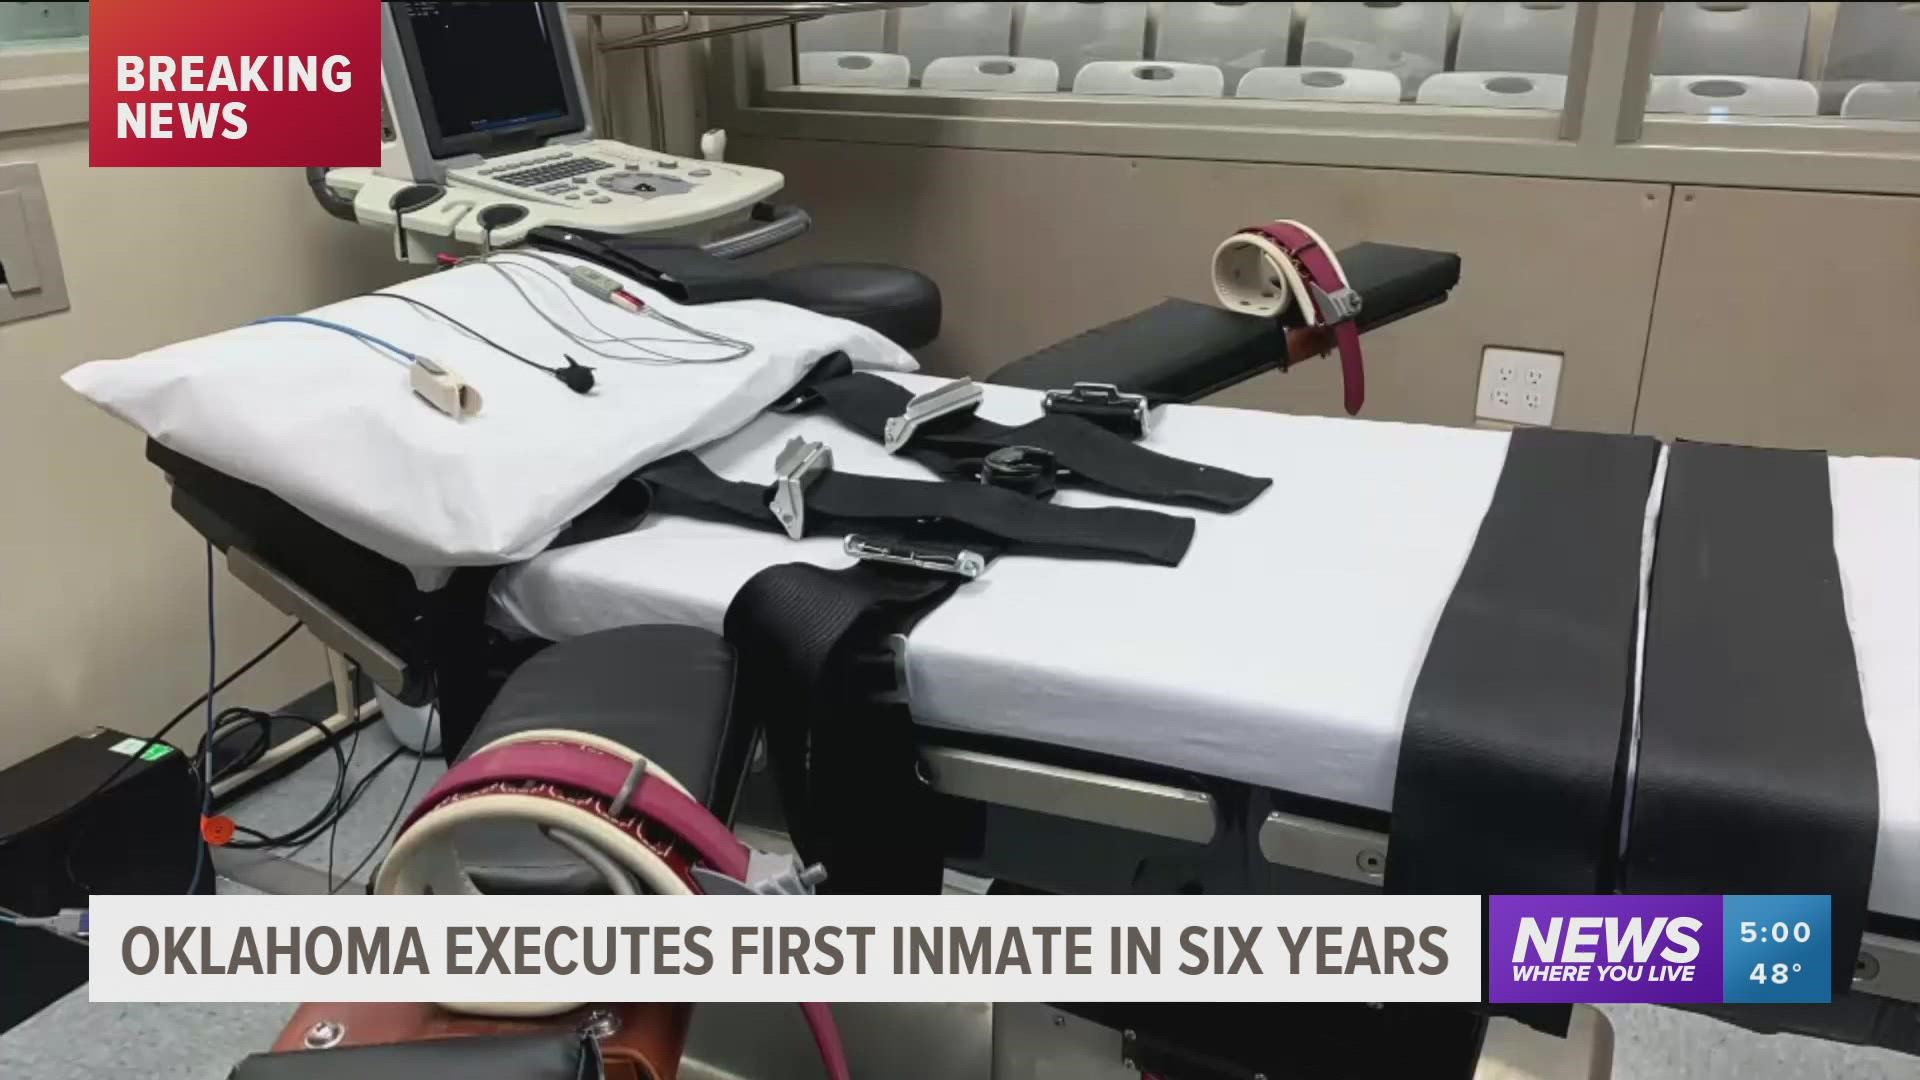 The Supreme Court lifted the stays that temporarily halted the executions of John Marion Grant and Julius Jones in Oklahoma.